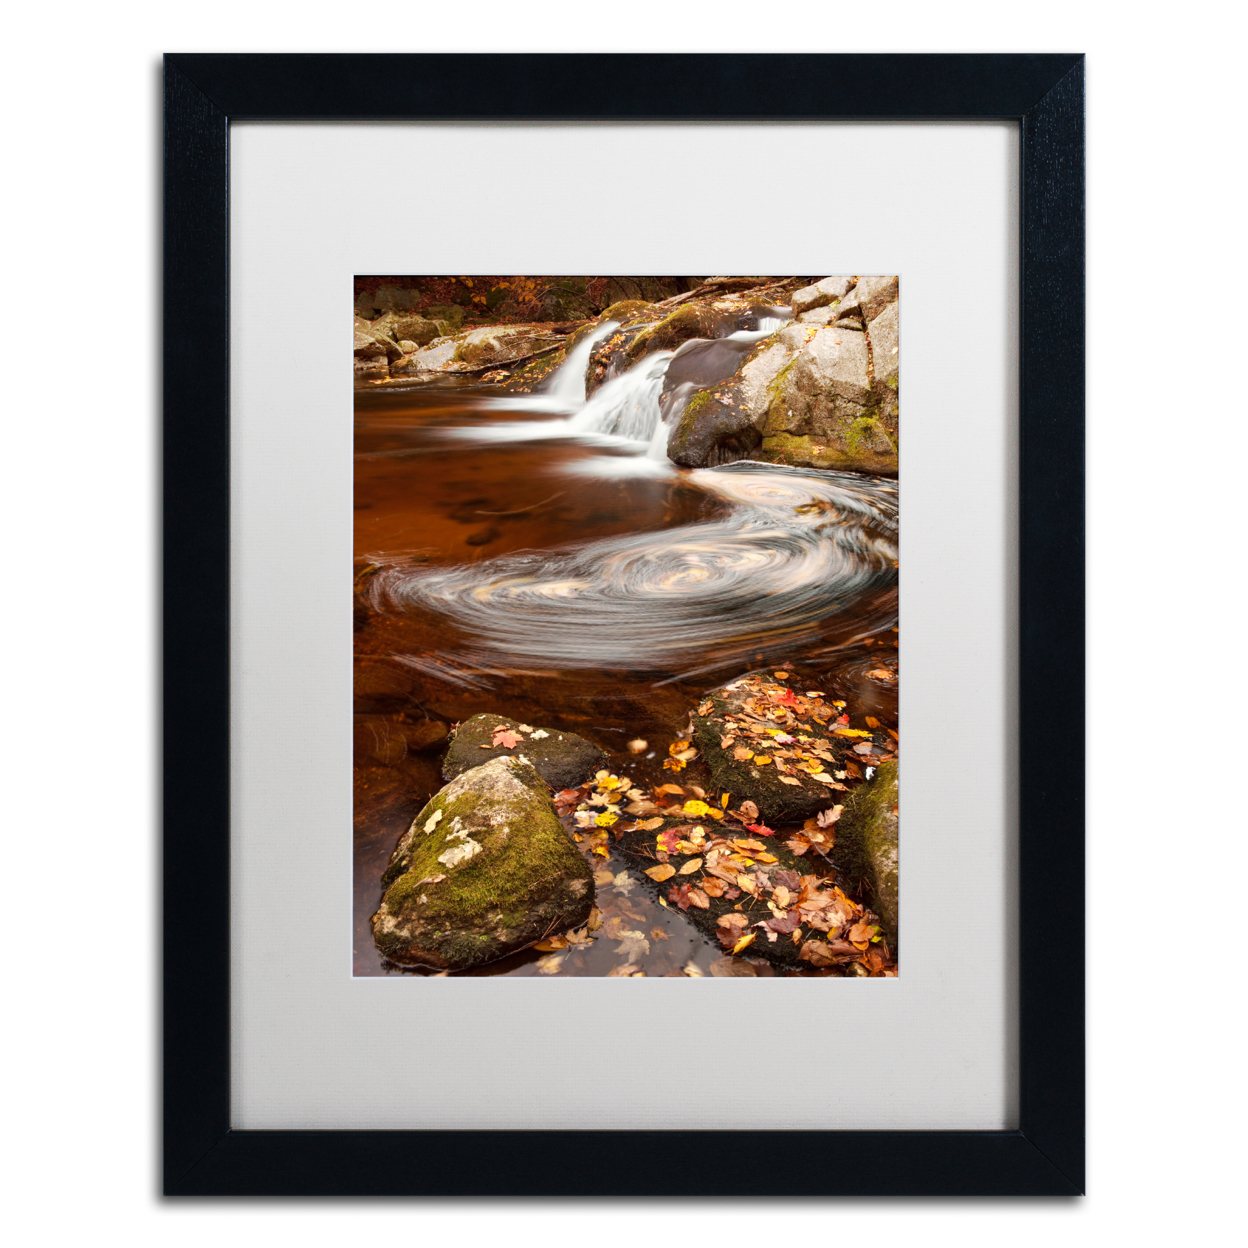 Michael Blanchette Photography 'Autumn Swirly' Black Wooden Framed Art 18 X 22 Inches